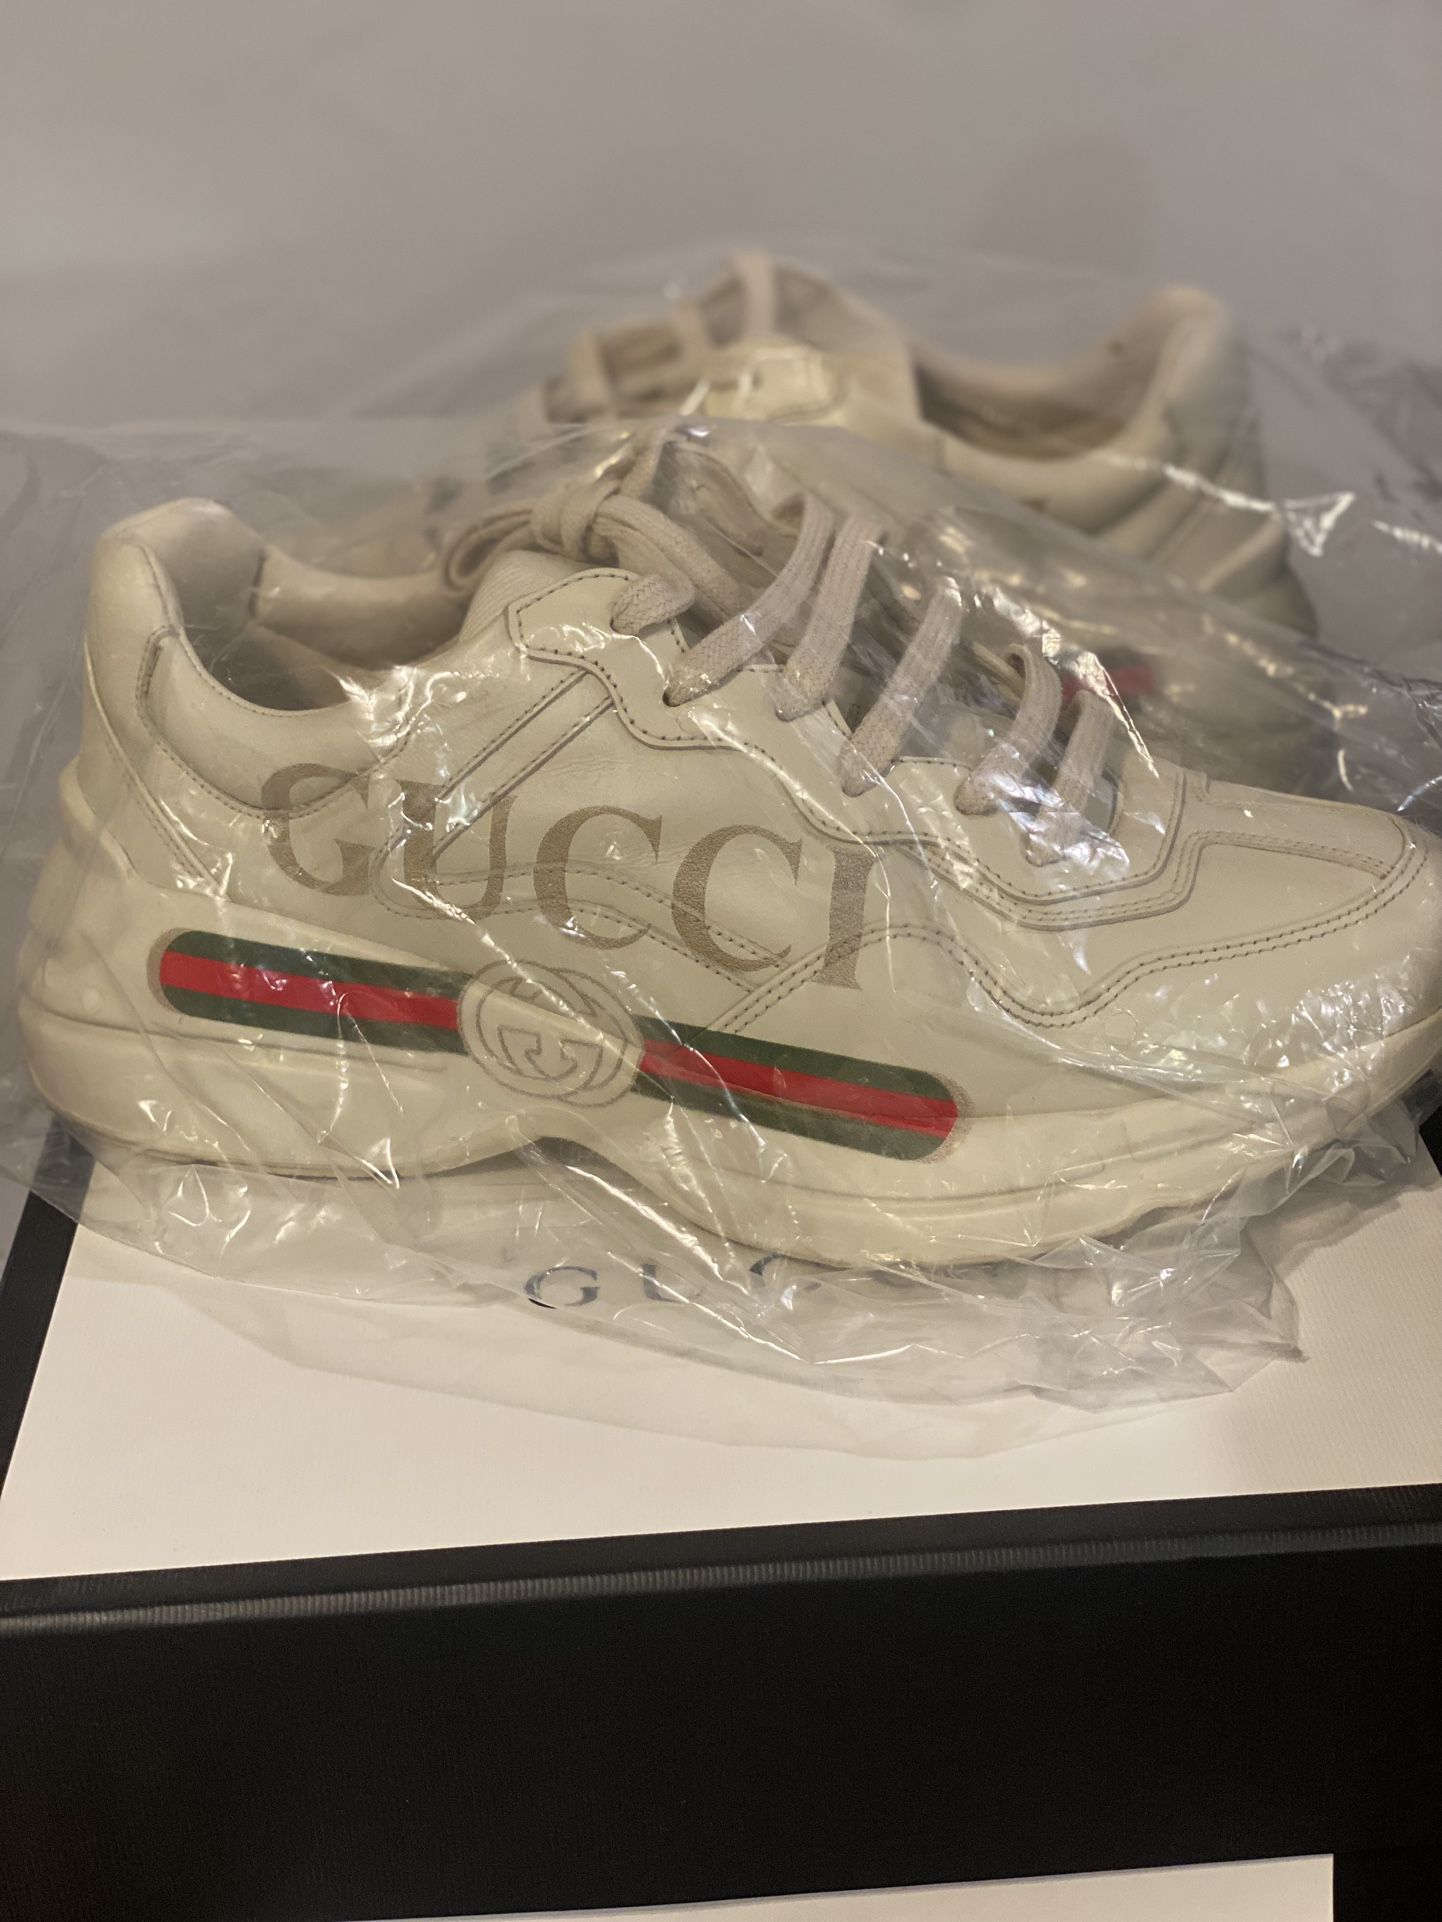 Gucci, Shoes, Gucci Shoes Brand New